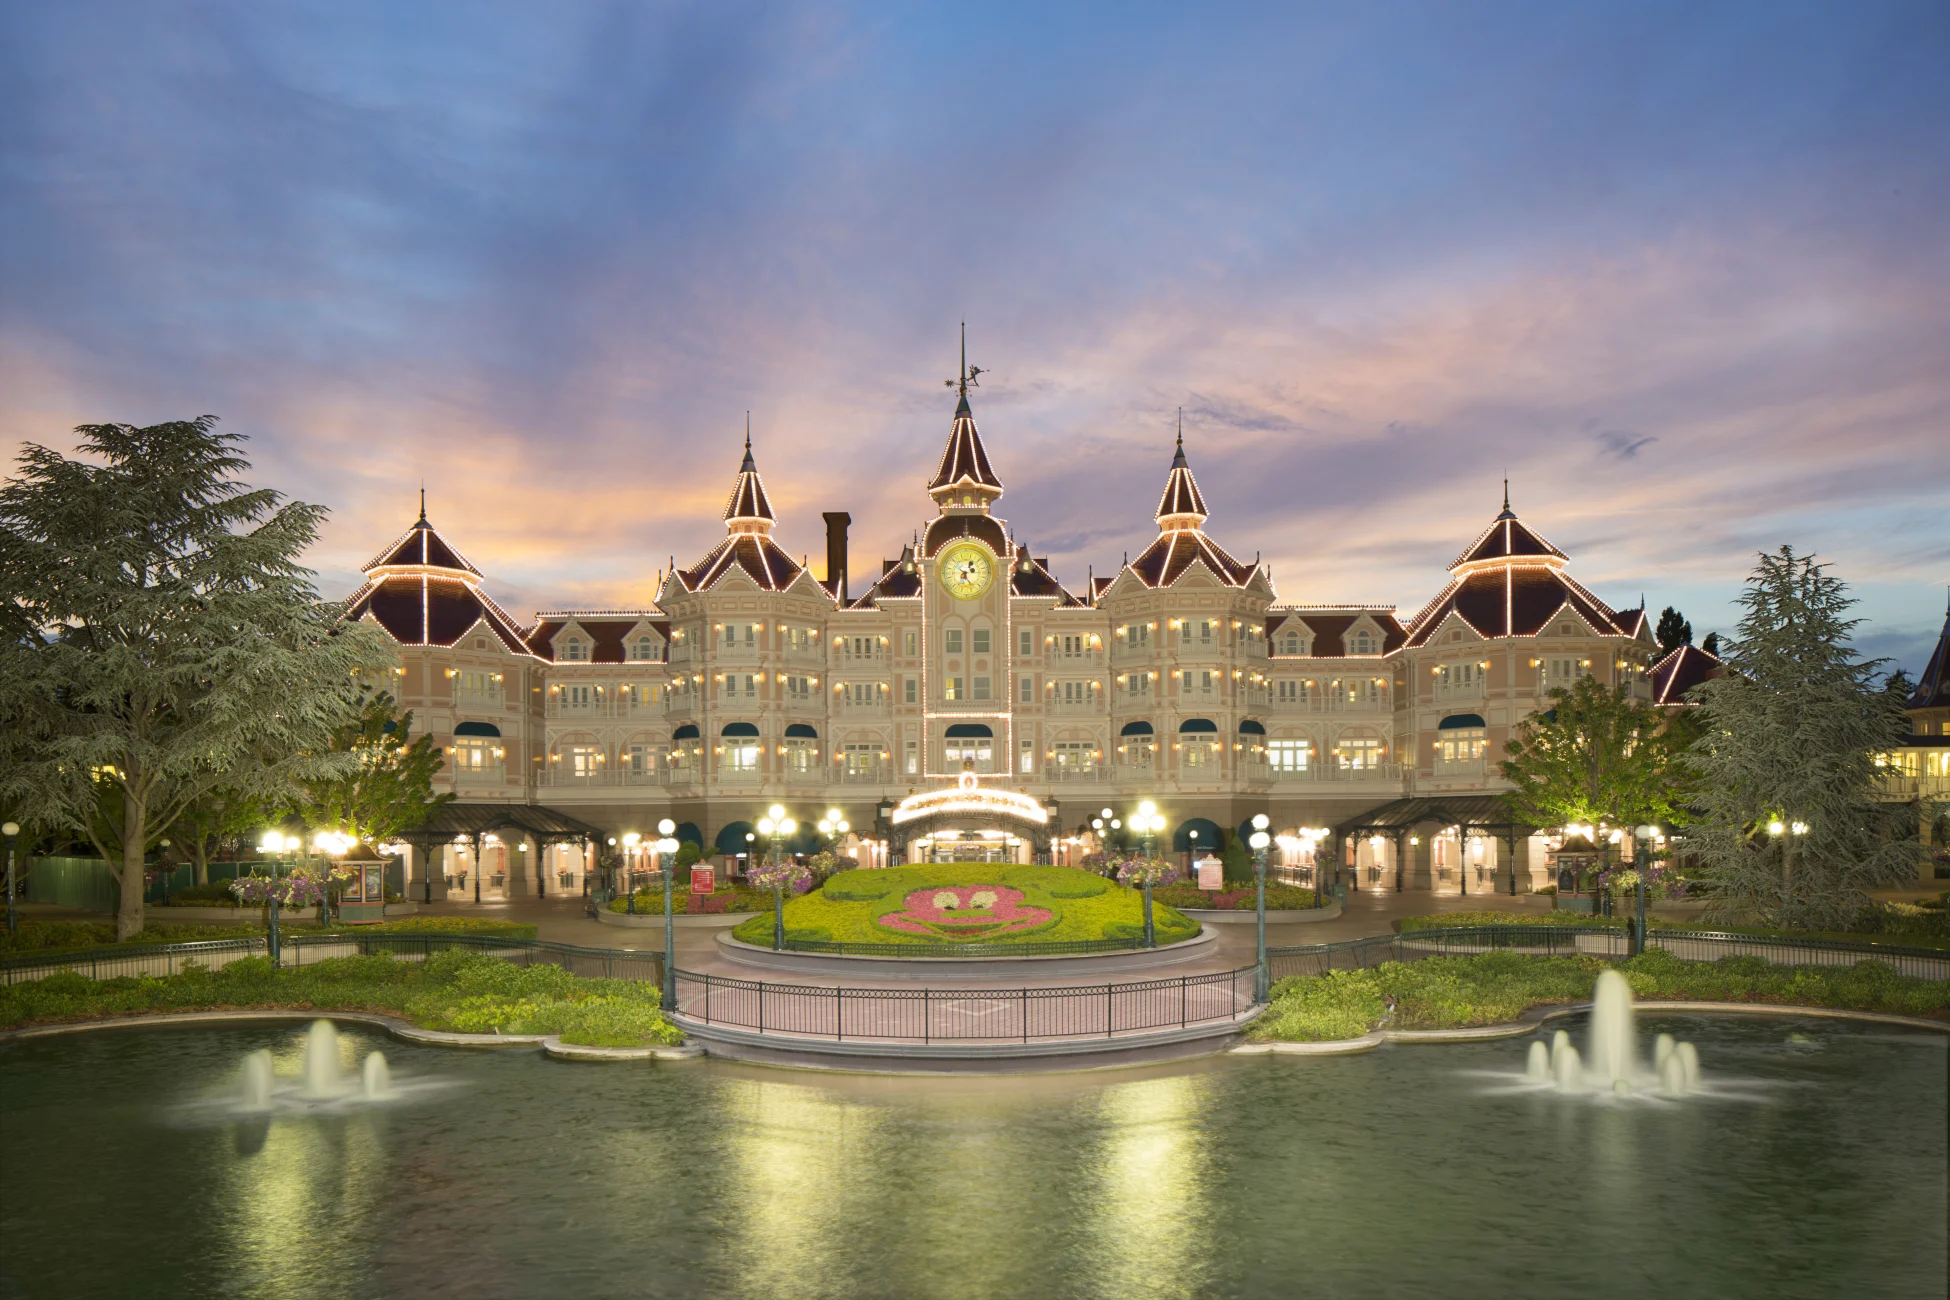 The Disneyland Paris Hotel will Reopen in 2024, with a Royal Princess Theme